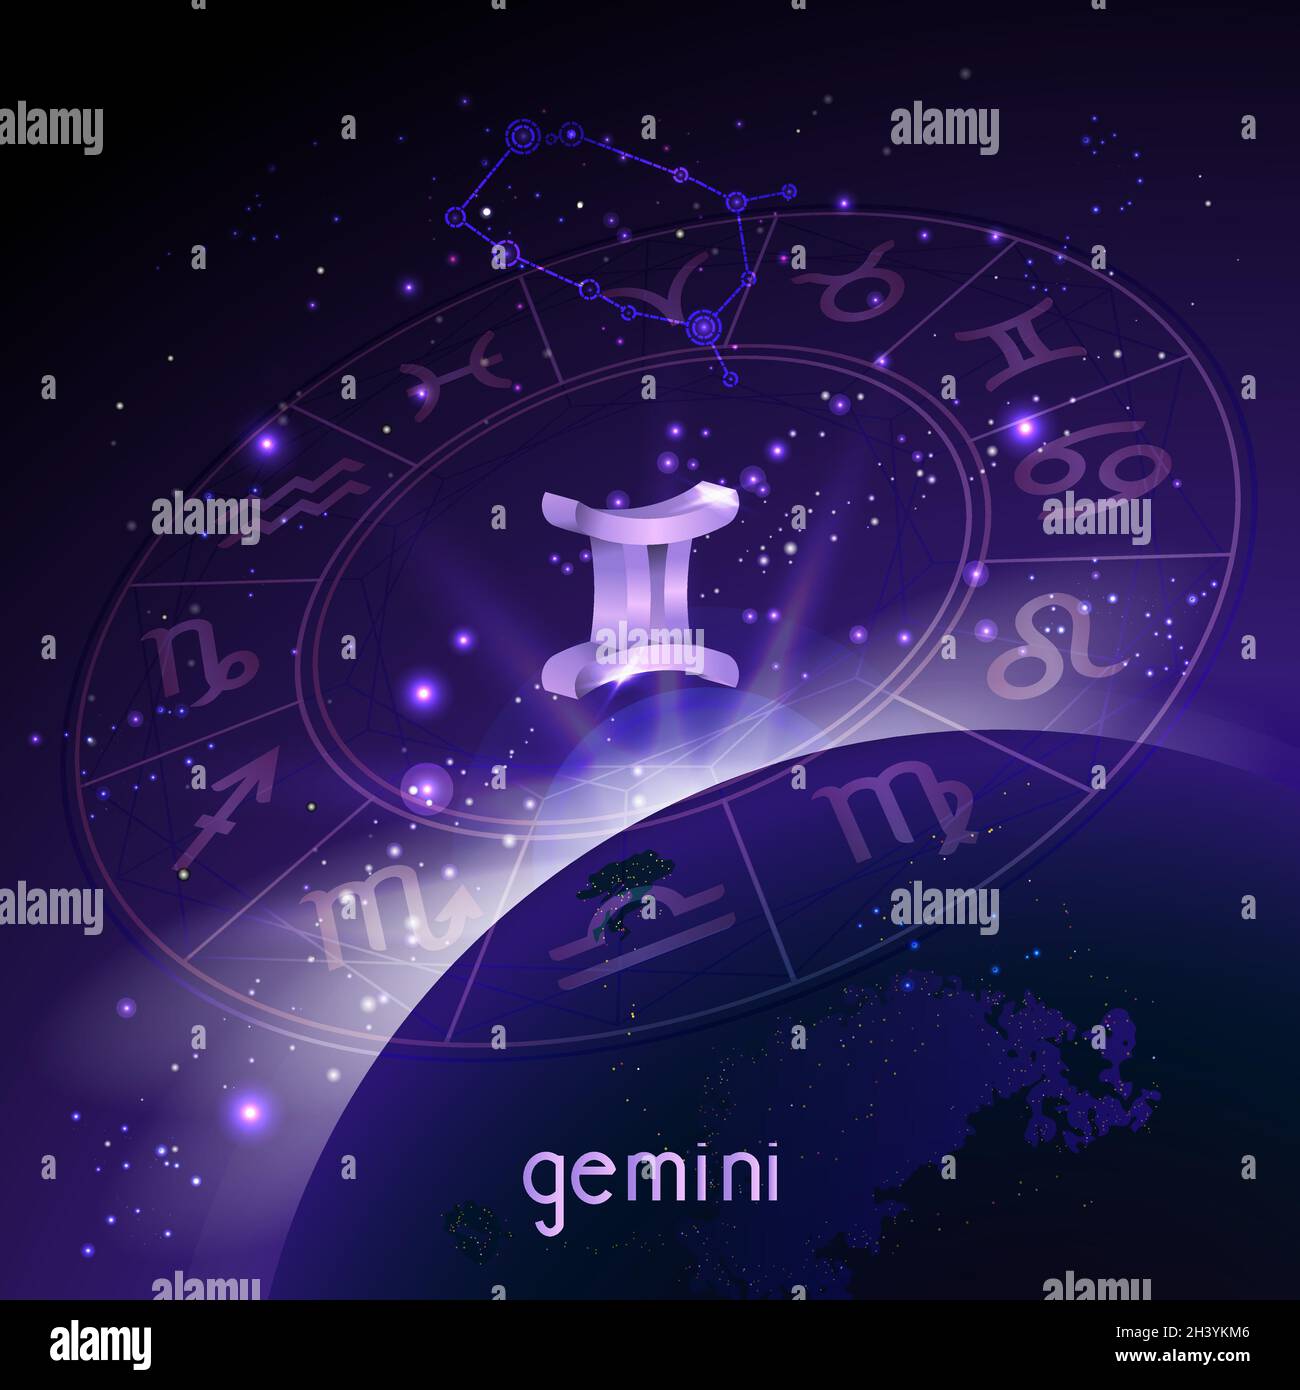 Vector illustration of 3D sign and constellation GEMINI with Horoscope ...